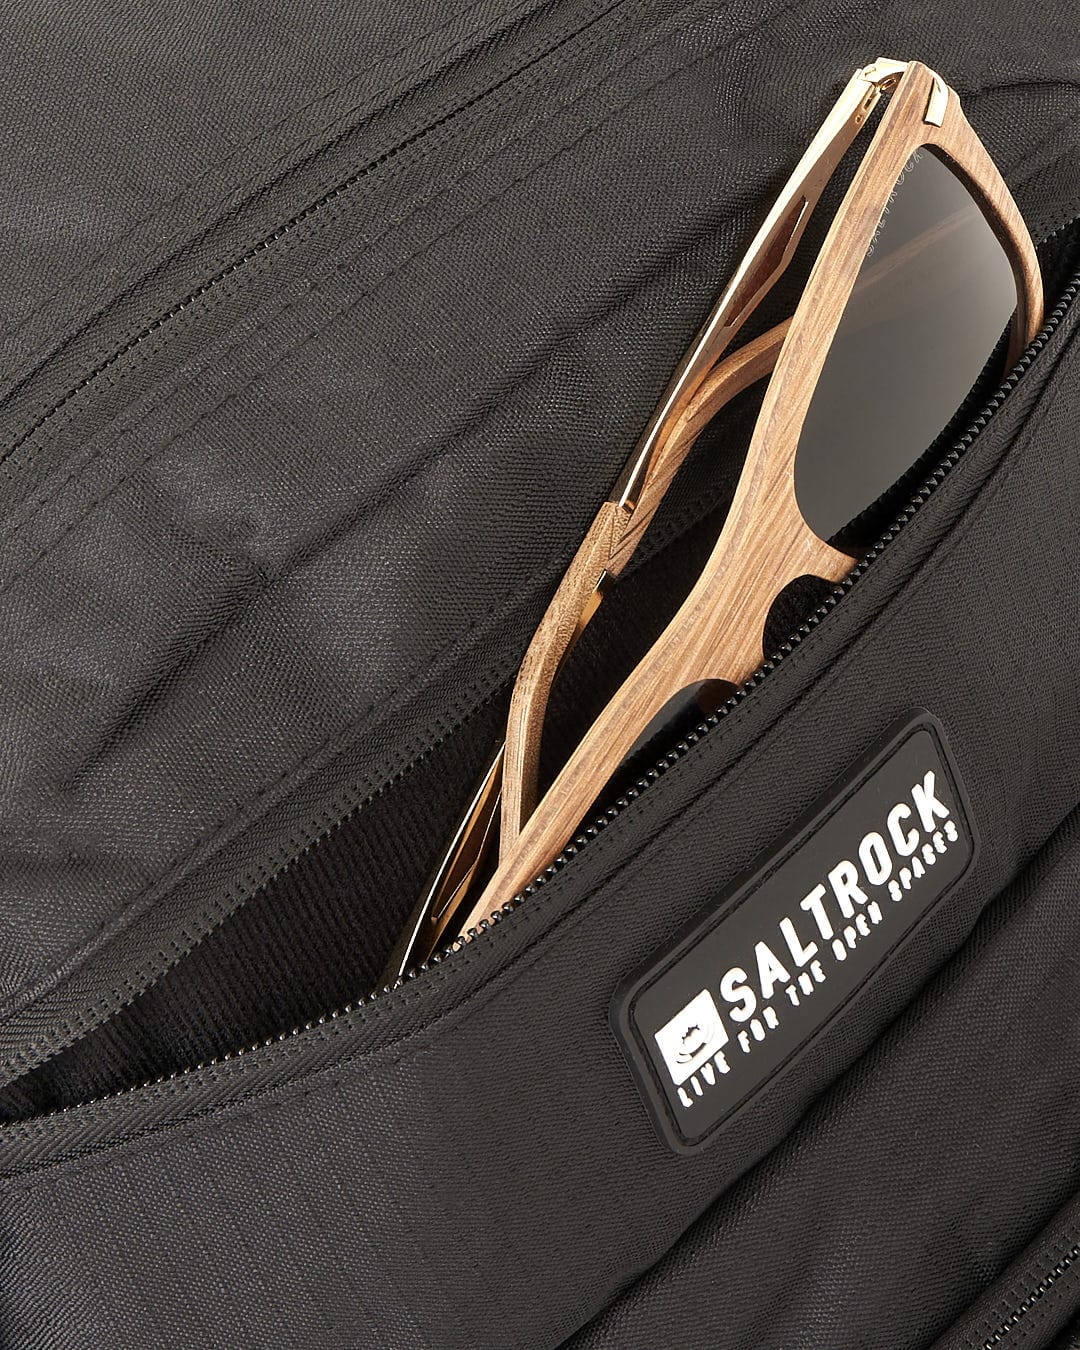 A Saltrock Boardwalk - Backpack - Black with a pair of sunglasses in it.